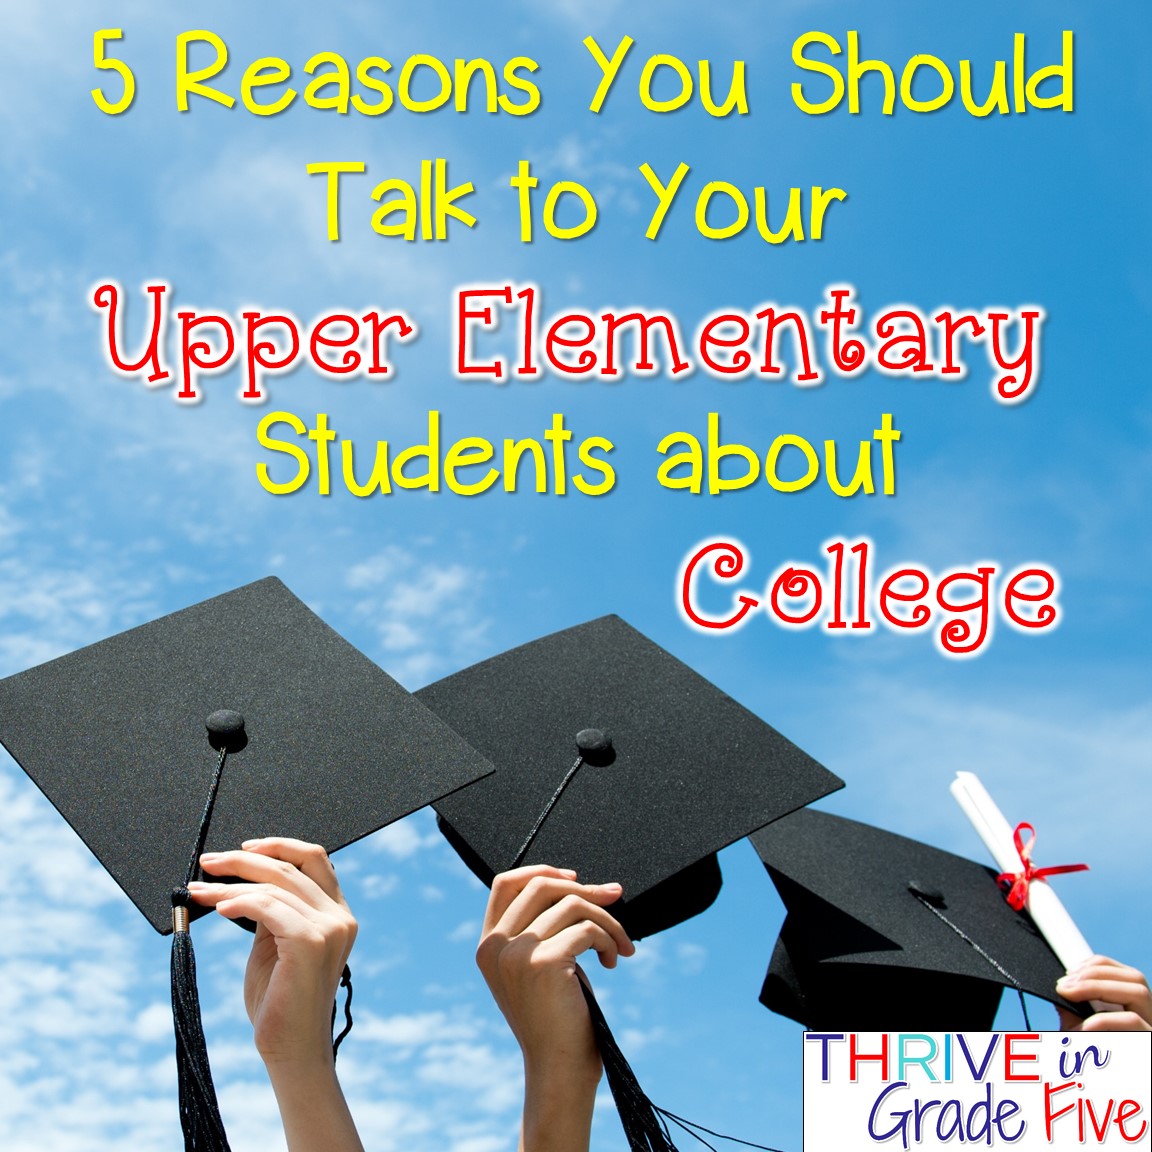 5 Reasons You Should Talk to Your Upper Elementary Students about College